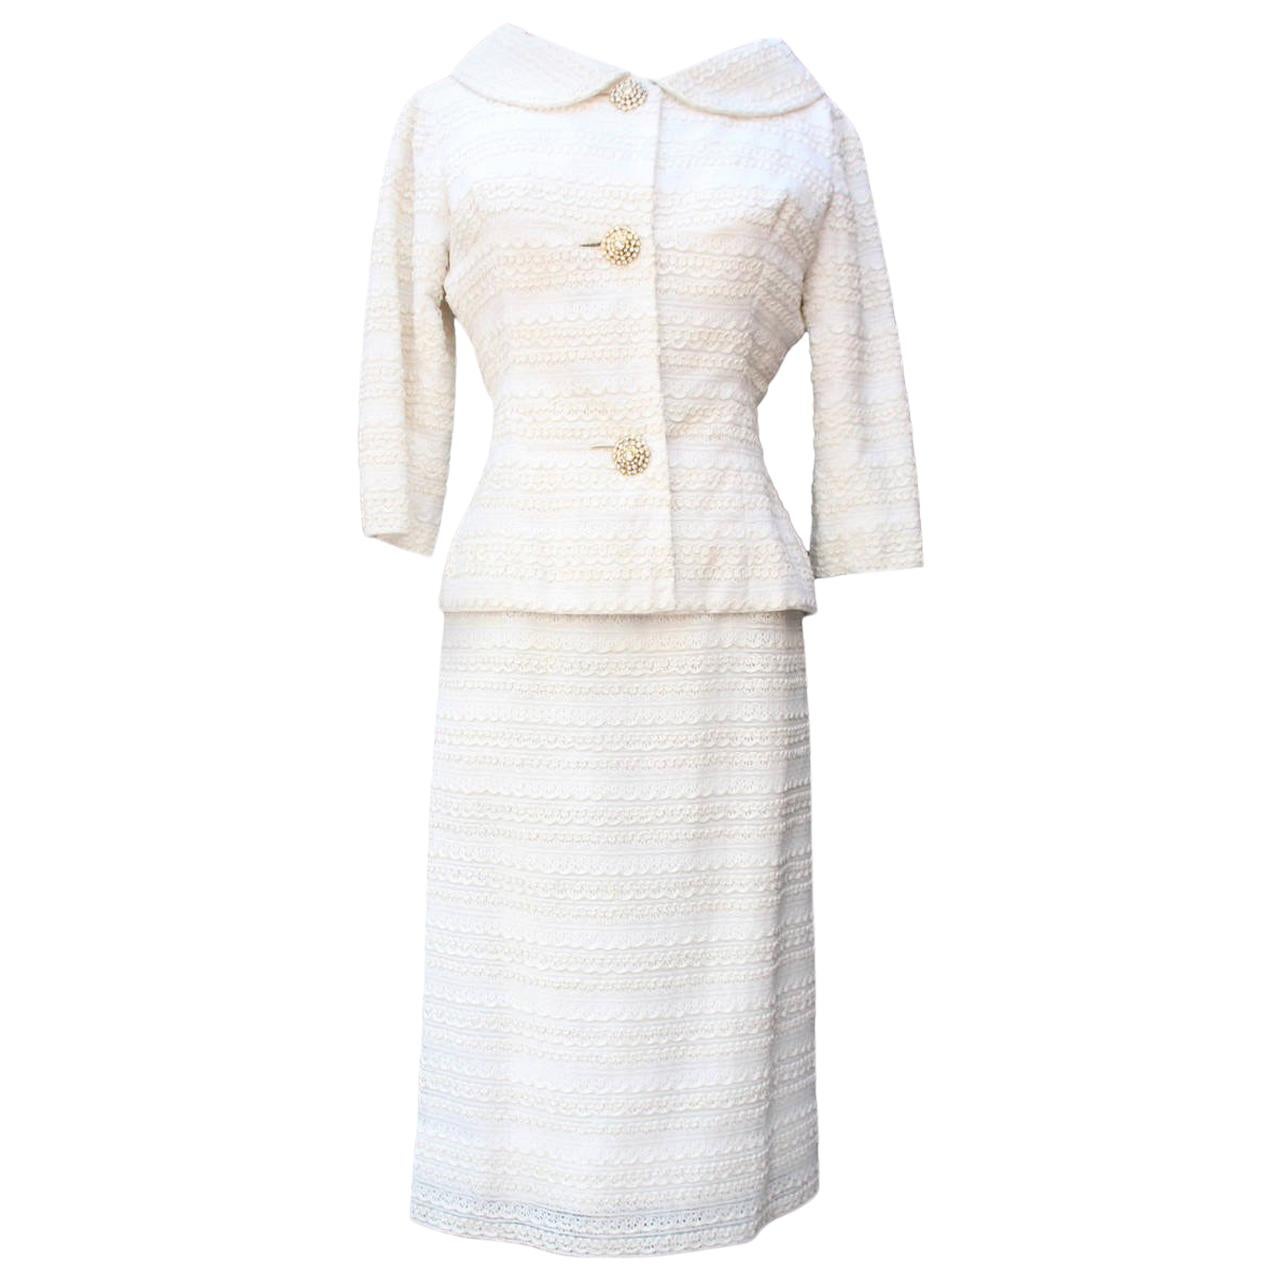 1961 Carven Haute Couture White Lace Dress and Jacket Ensemble For Sale